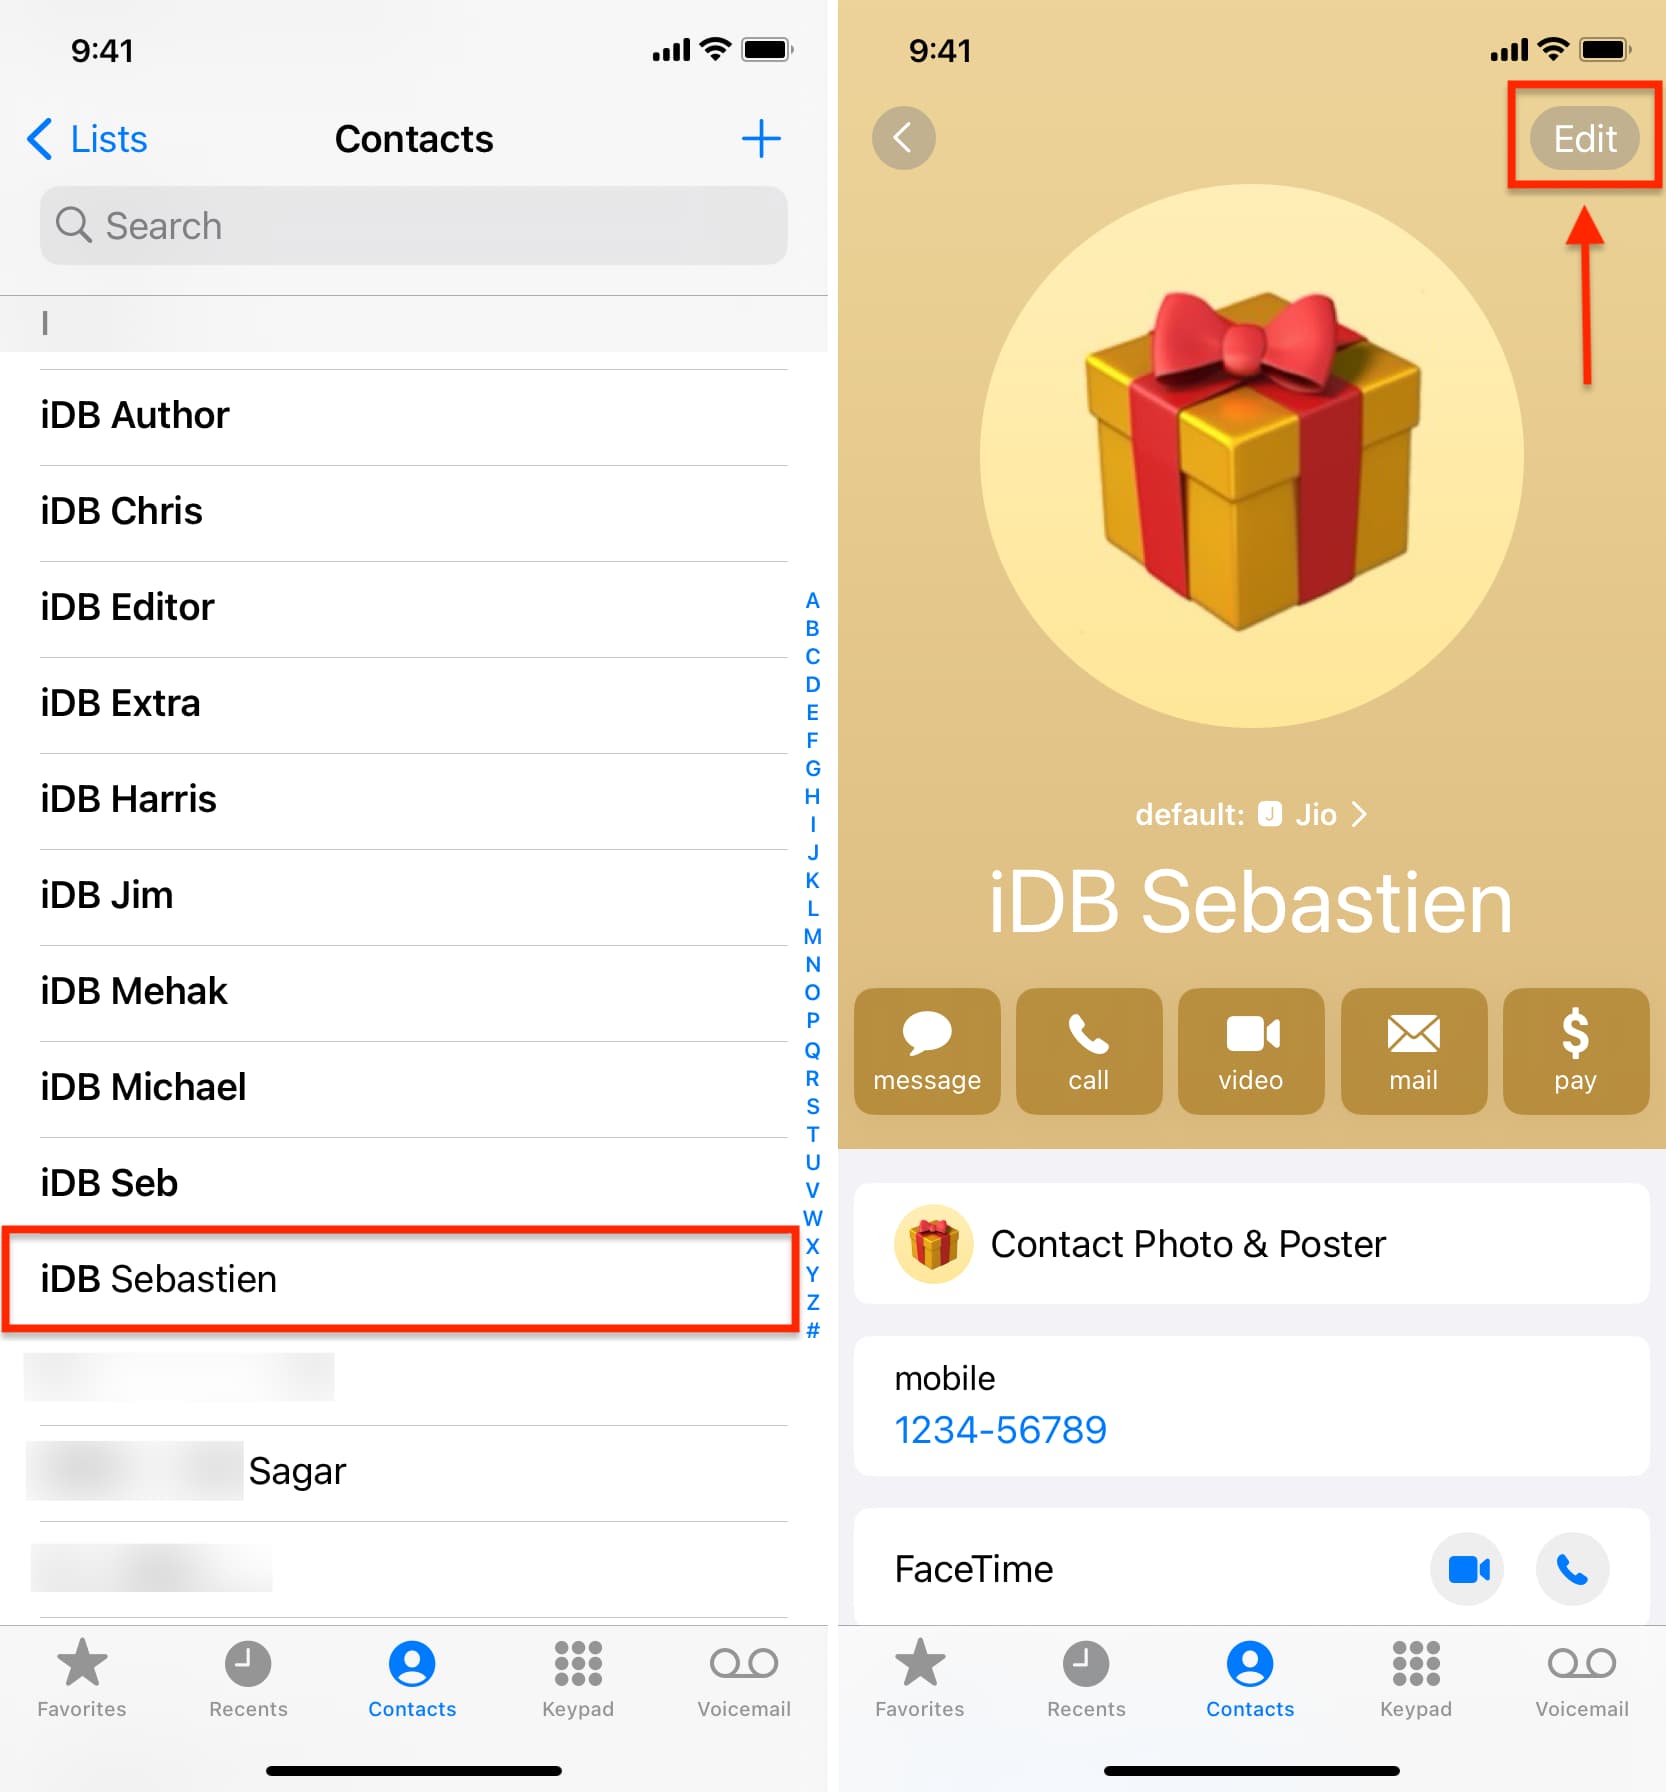 Edit saved contact from iPhone Contacts app